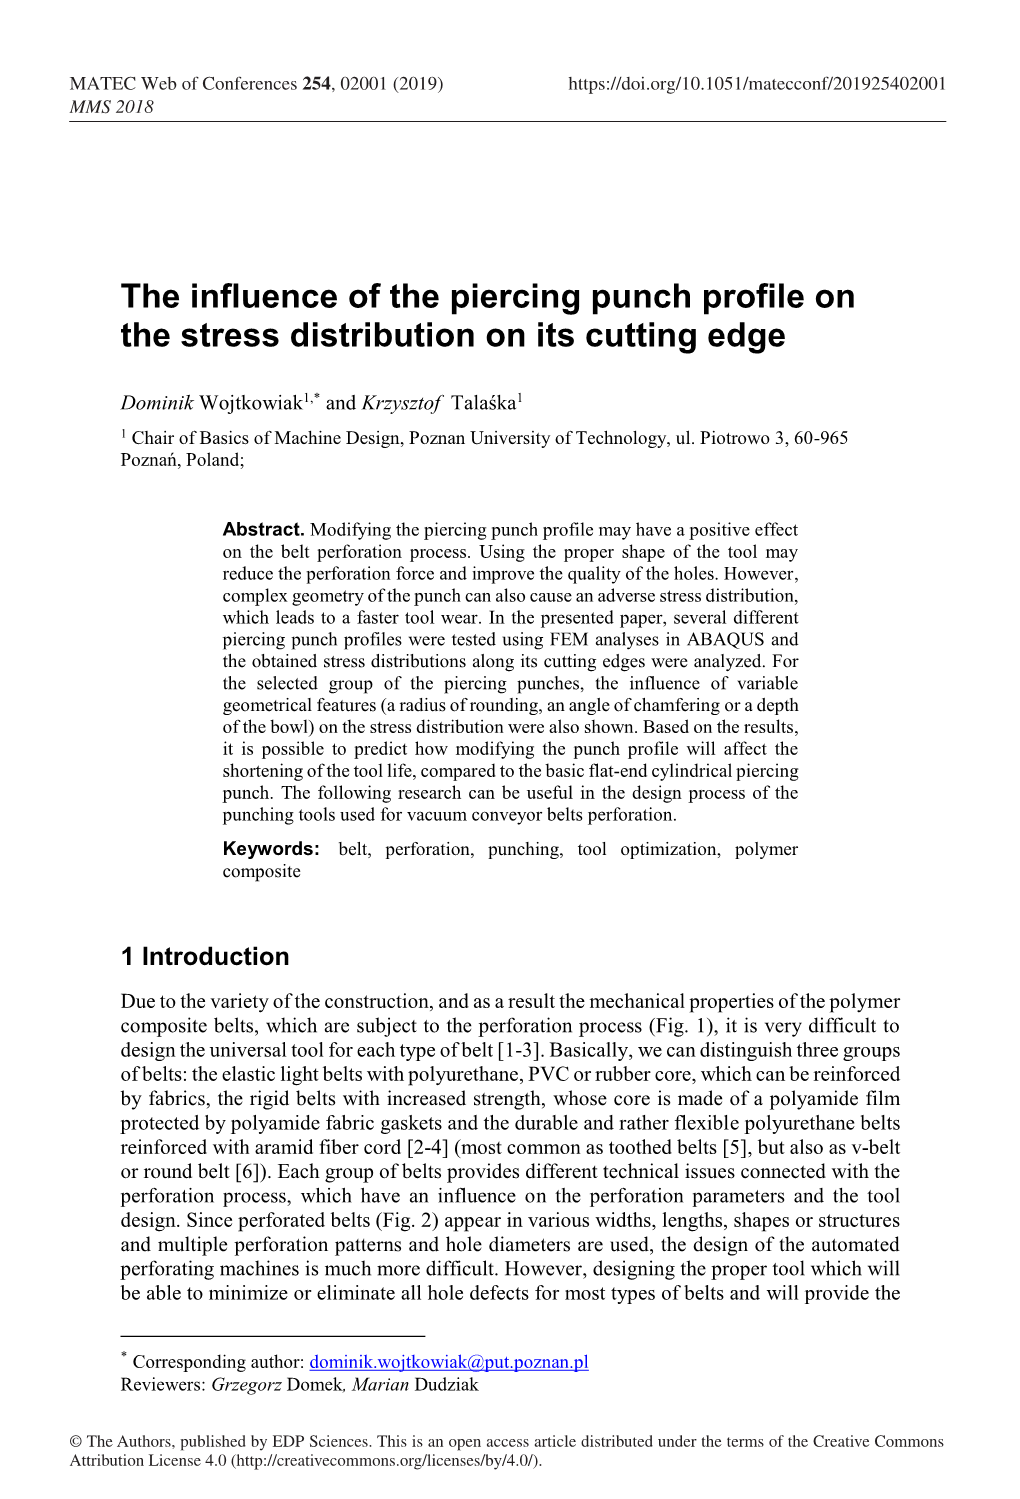 The Influence of the Piercing Punch Profile on the Stress Distribution on Its Cutting Edge